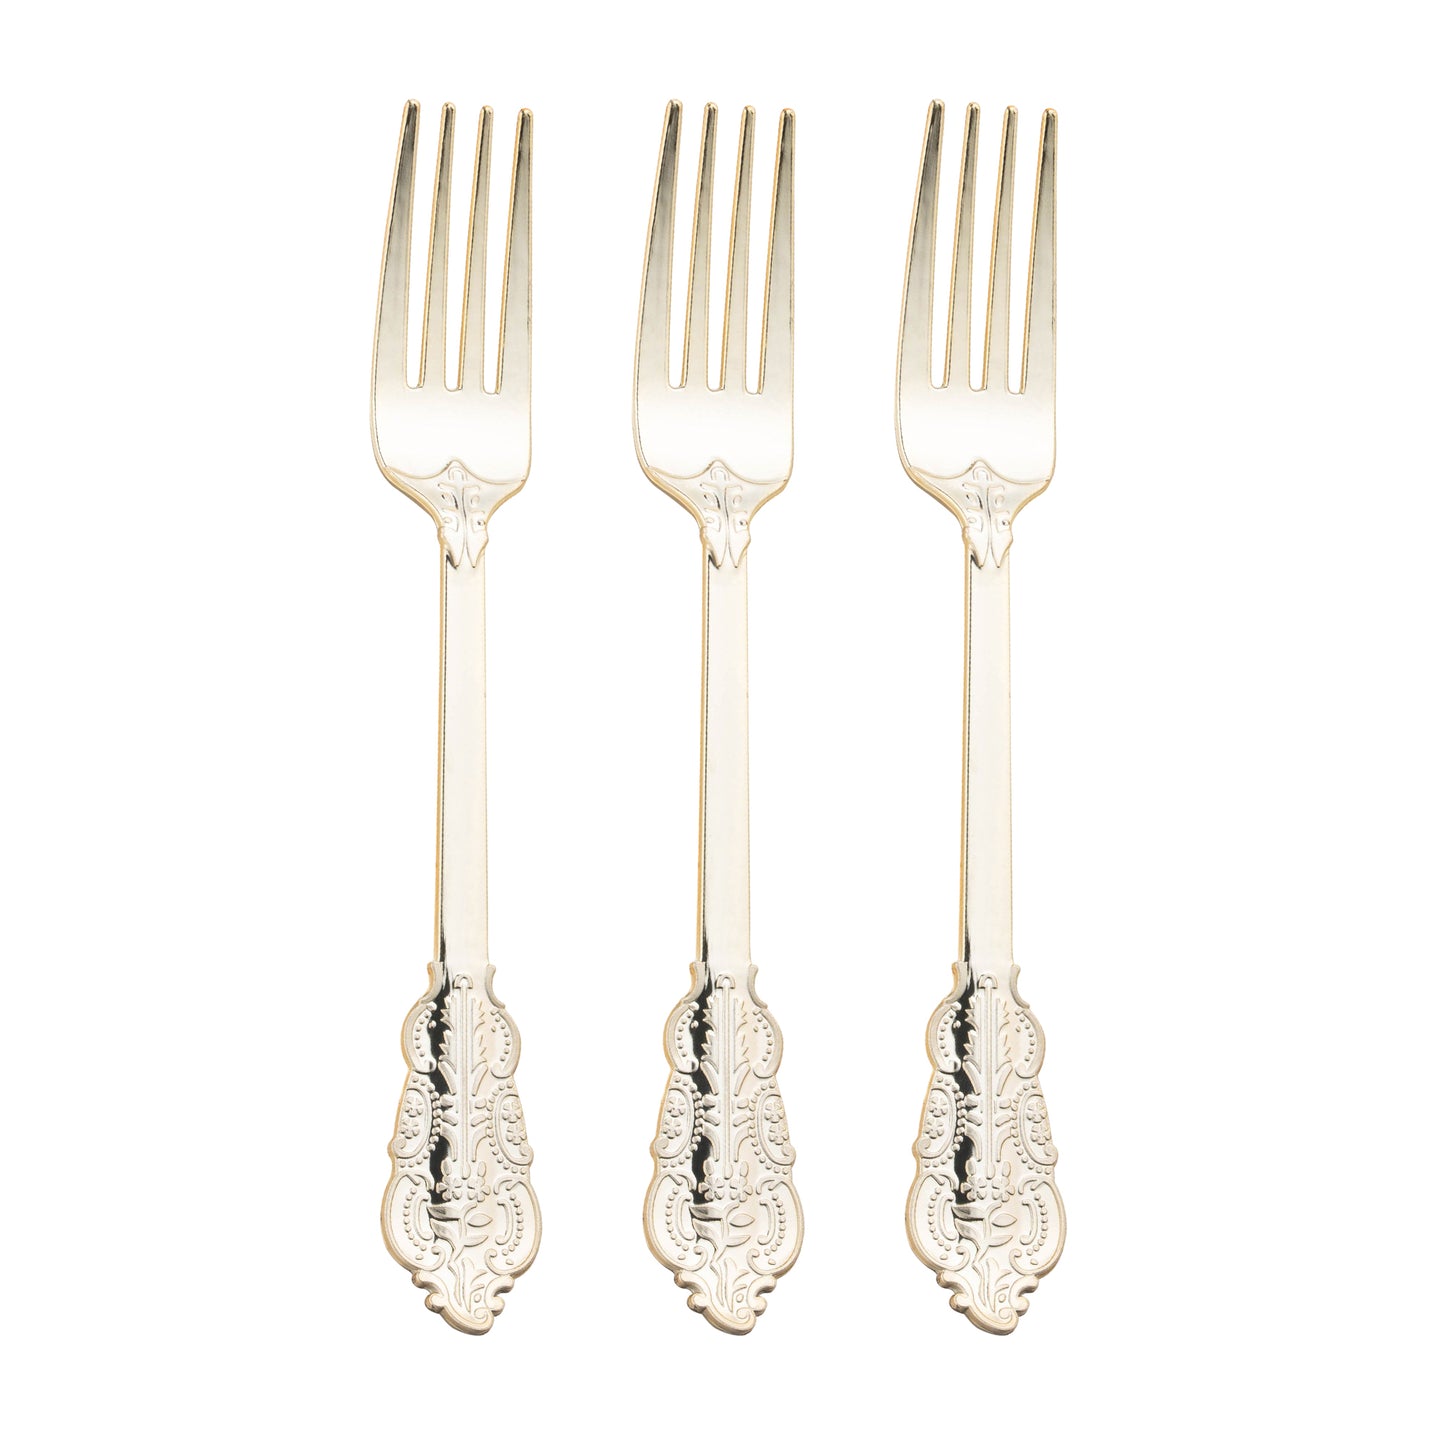 7.4" Shiny Baroque Gold Disposable Plastic Forks